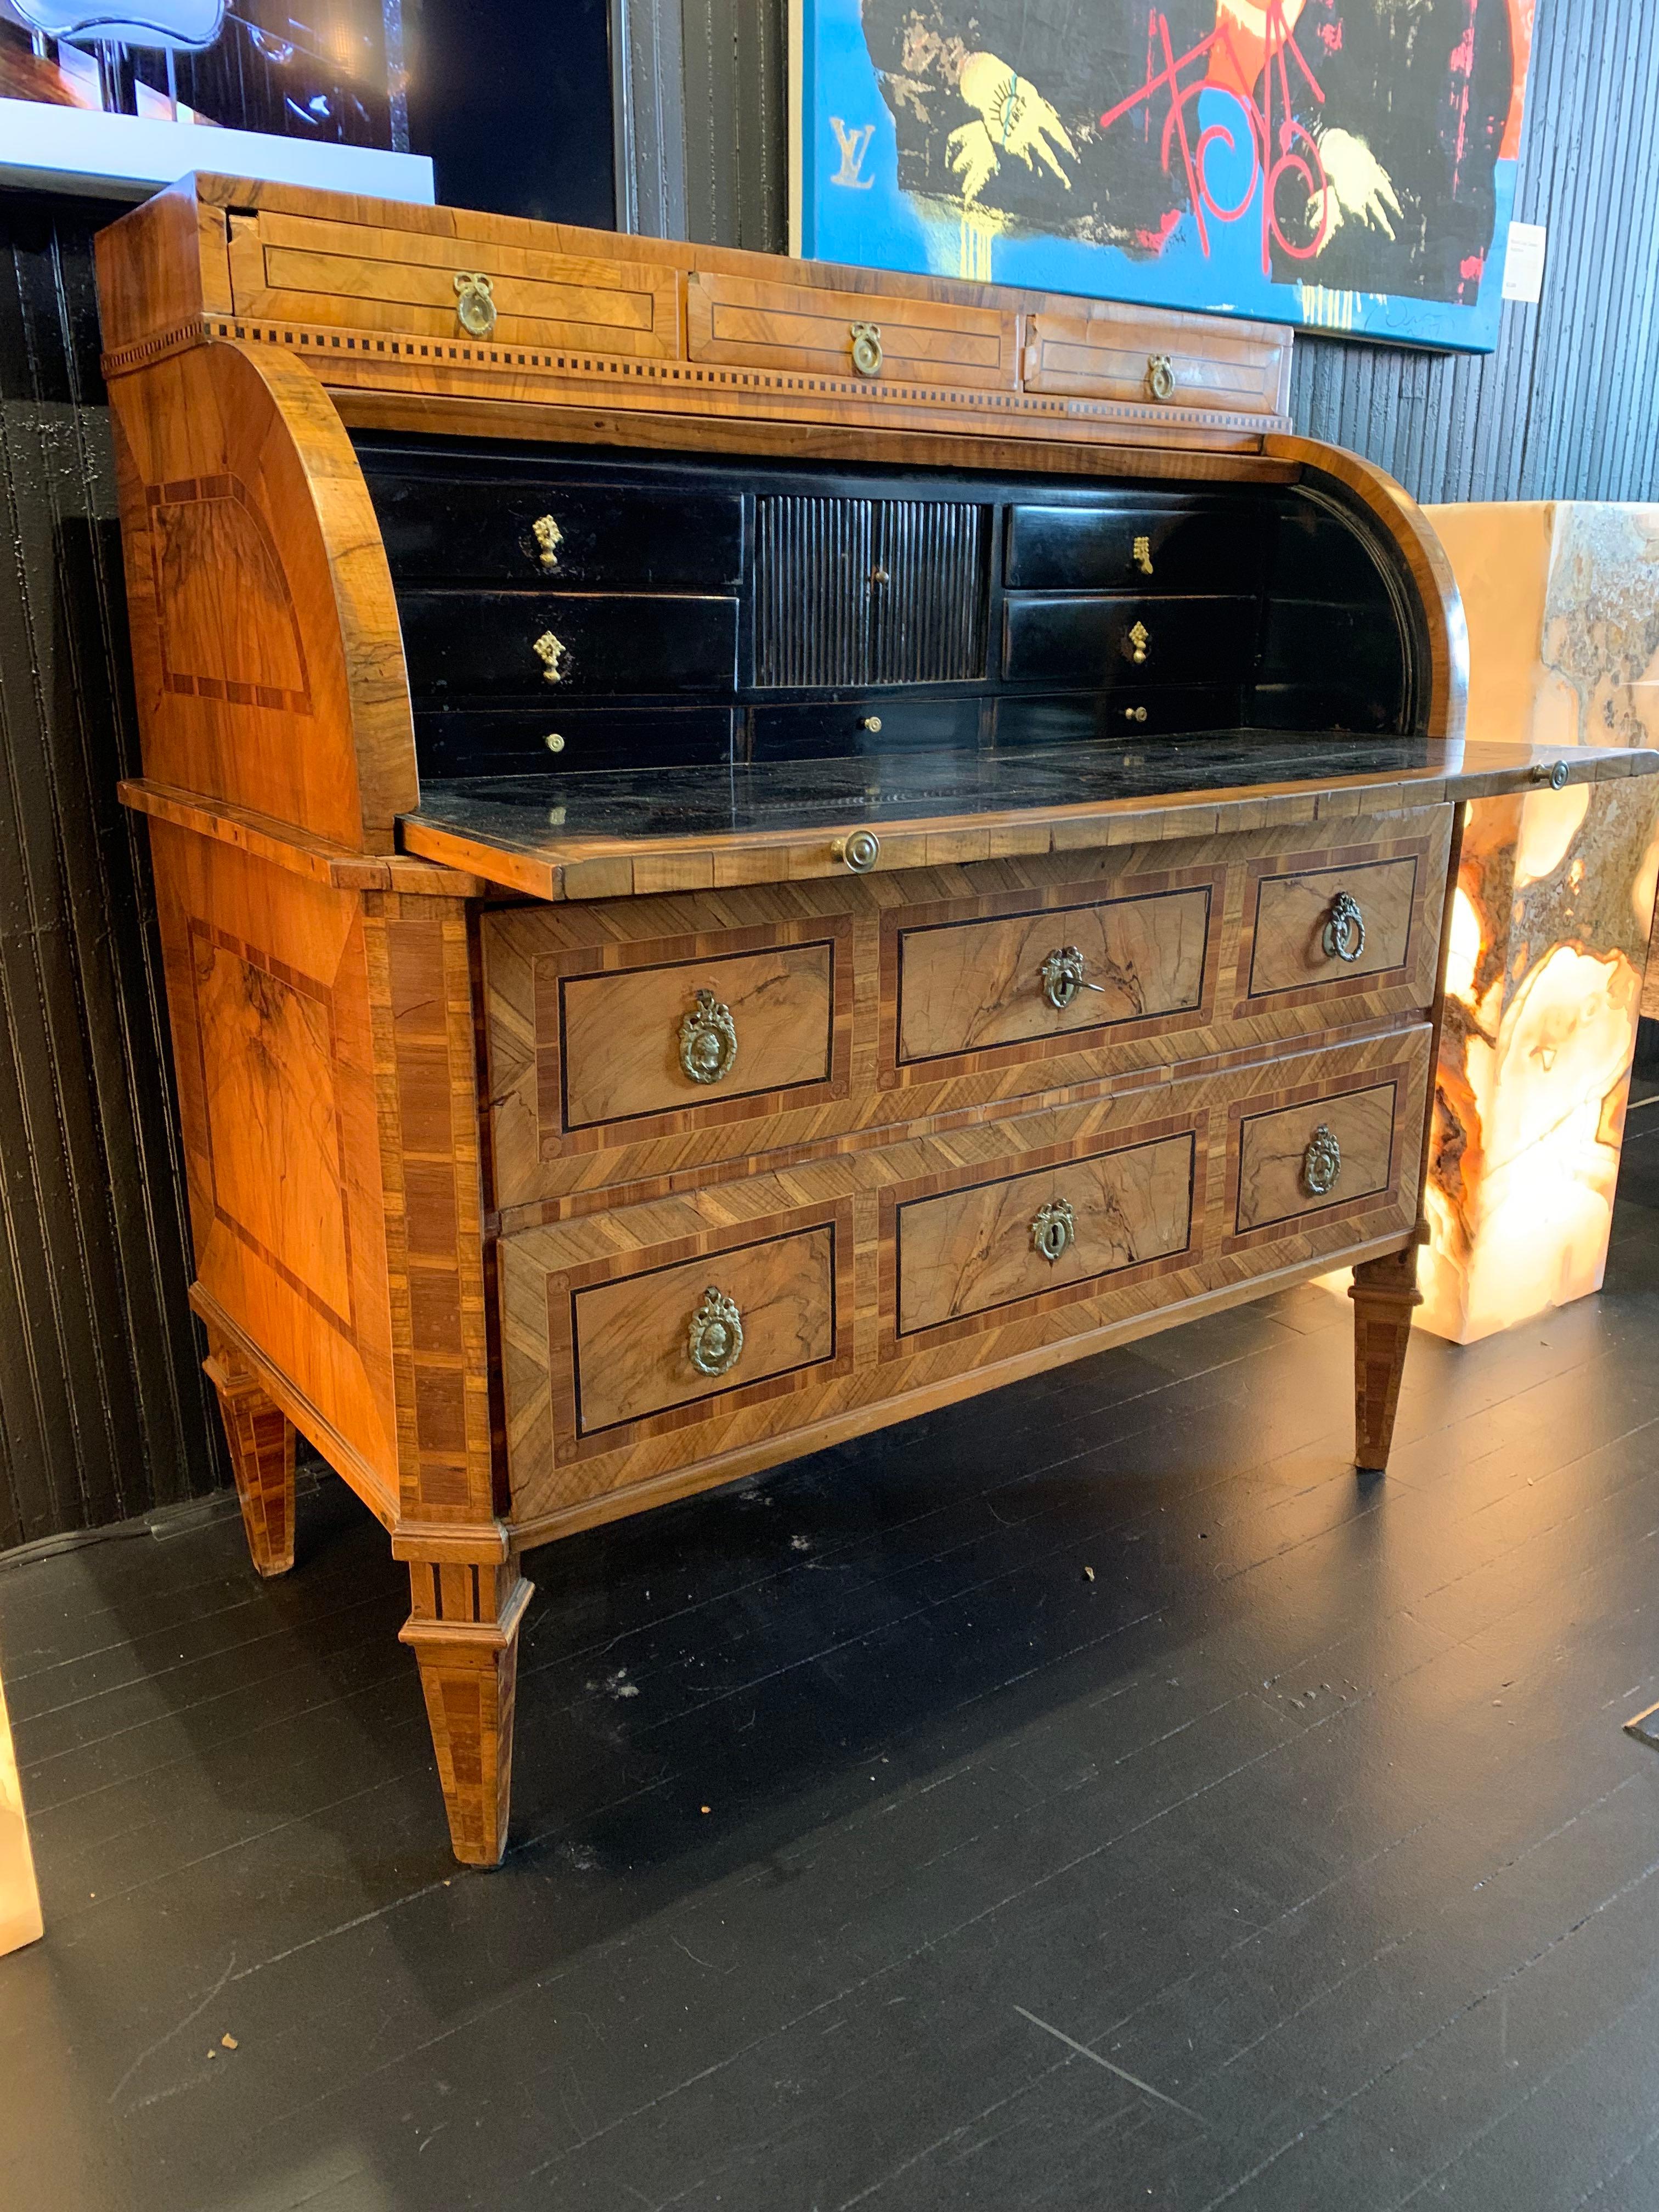 Handcrafted marquetry inlaid cylinder desk with original brass hardware. The marquetry inlay is burled book match veneer encased in geometric inlays. The casework below sits on tapered spade legs and includes two large drawers. The roll-top cylinder